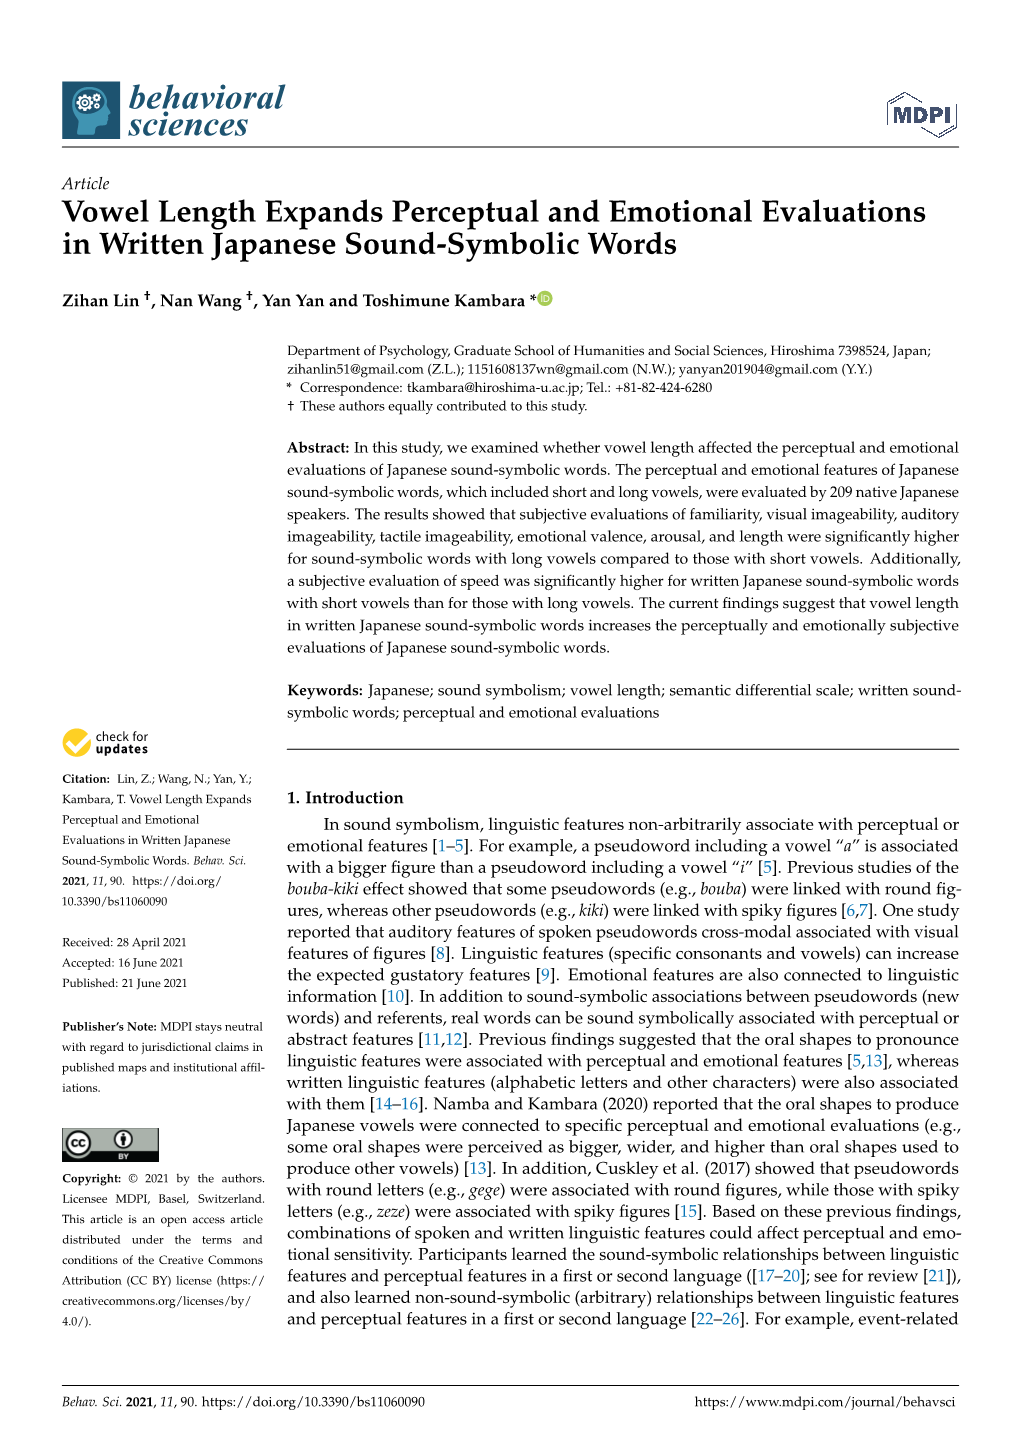 Vowel Length Expands Perceptual and Emotional Evaluations in Written Japanese Sound-Symbolic Words